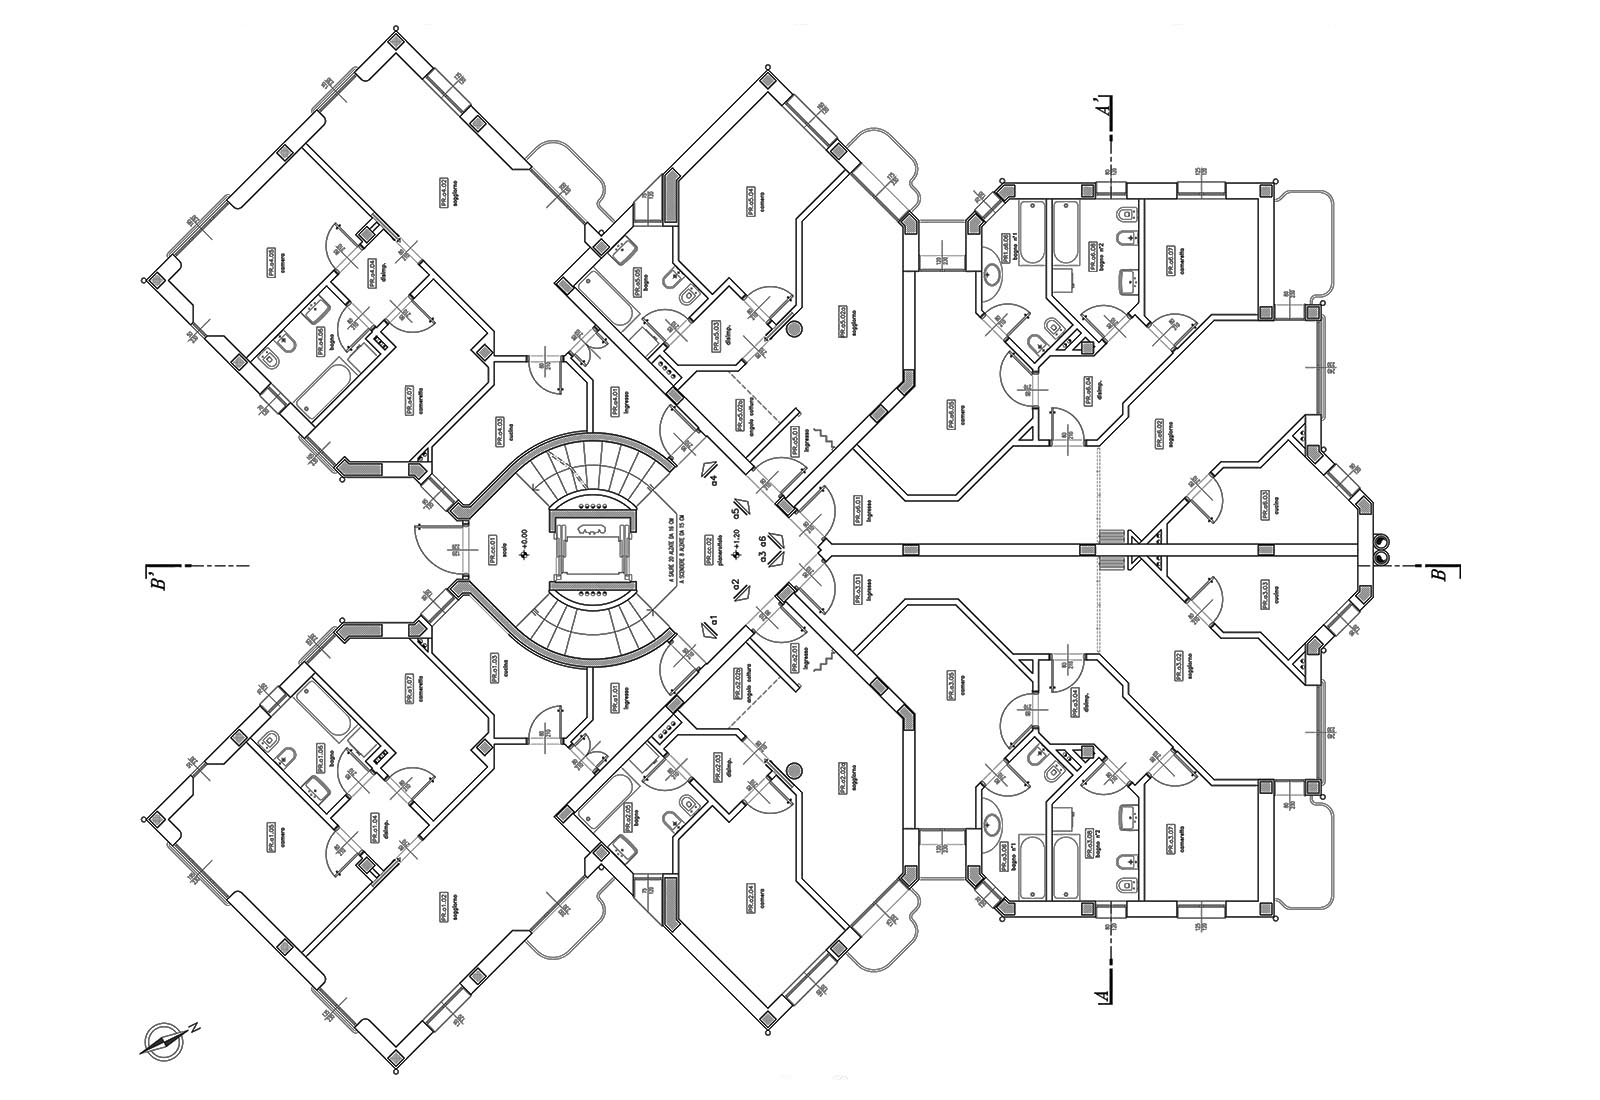 Residential ensemble in Macherio - Type A building - Typical floor plan